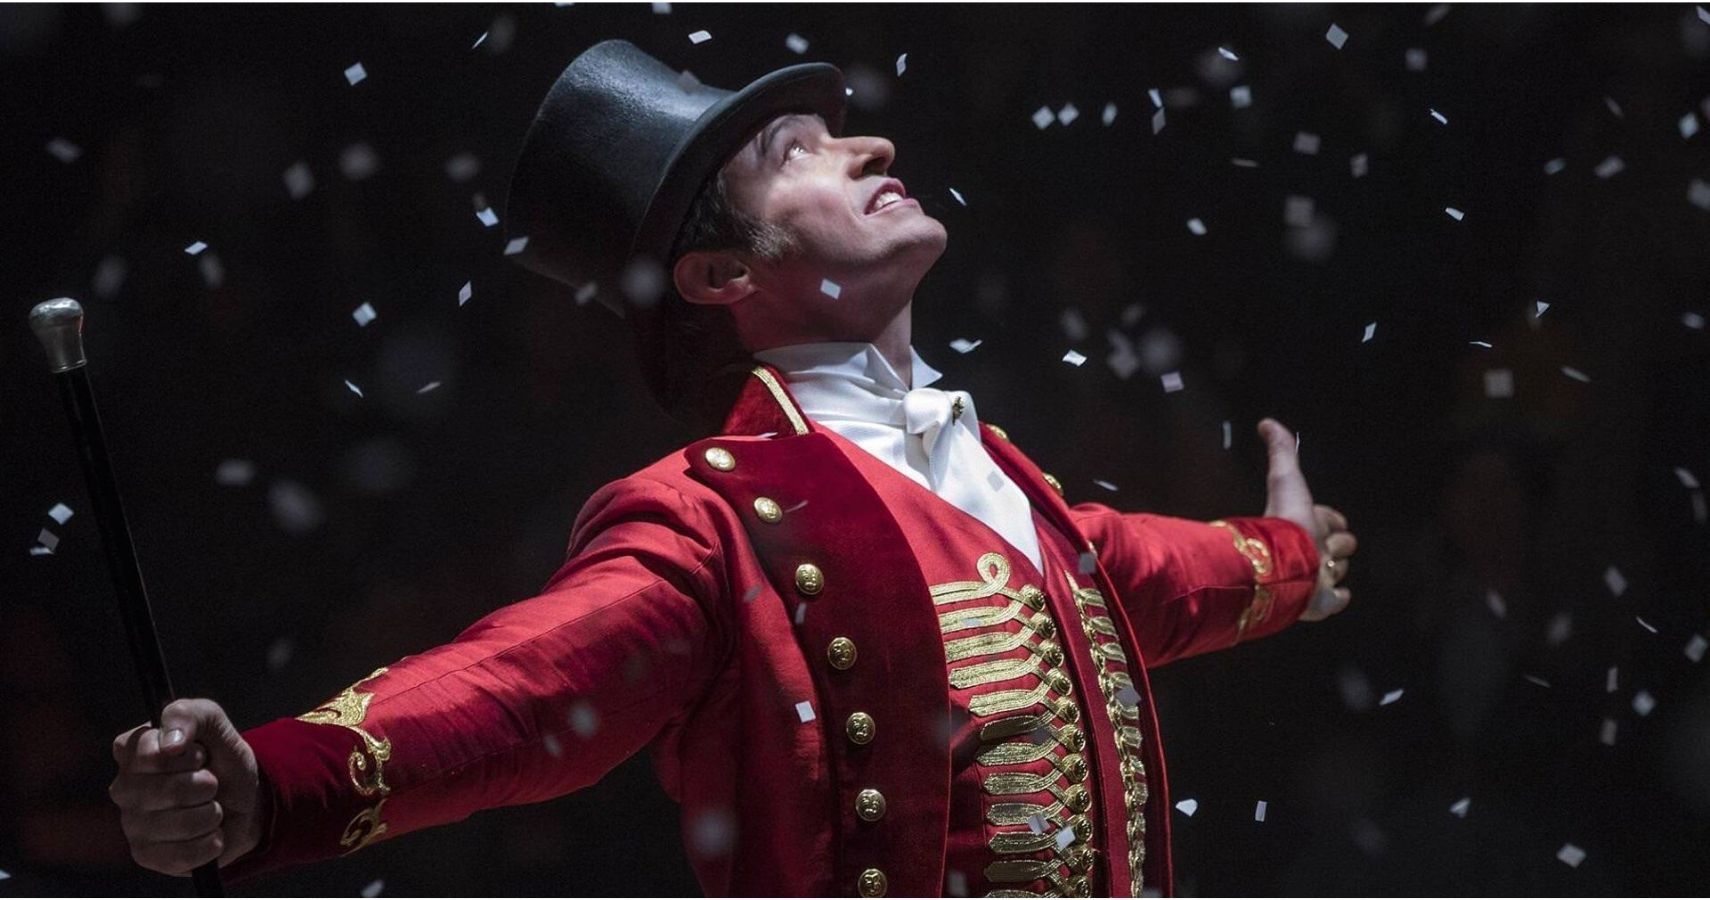 15 Most Inspiring Quotes From The Greatest Showman